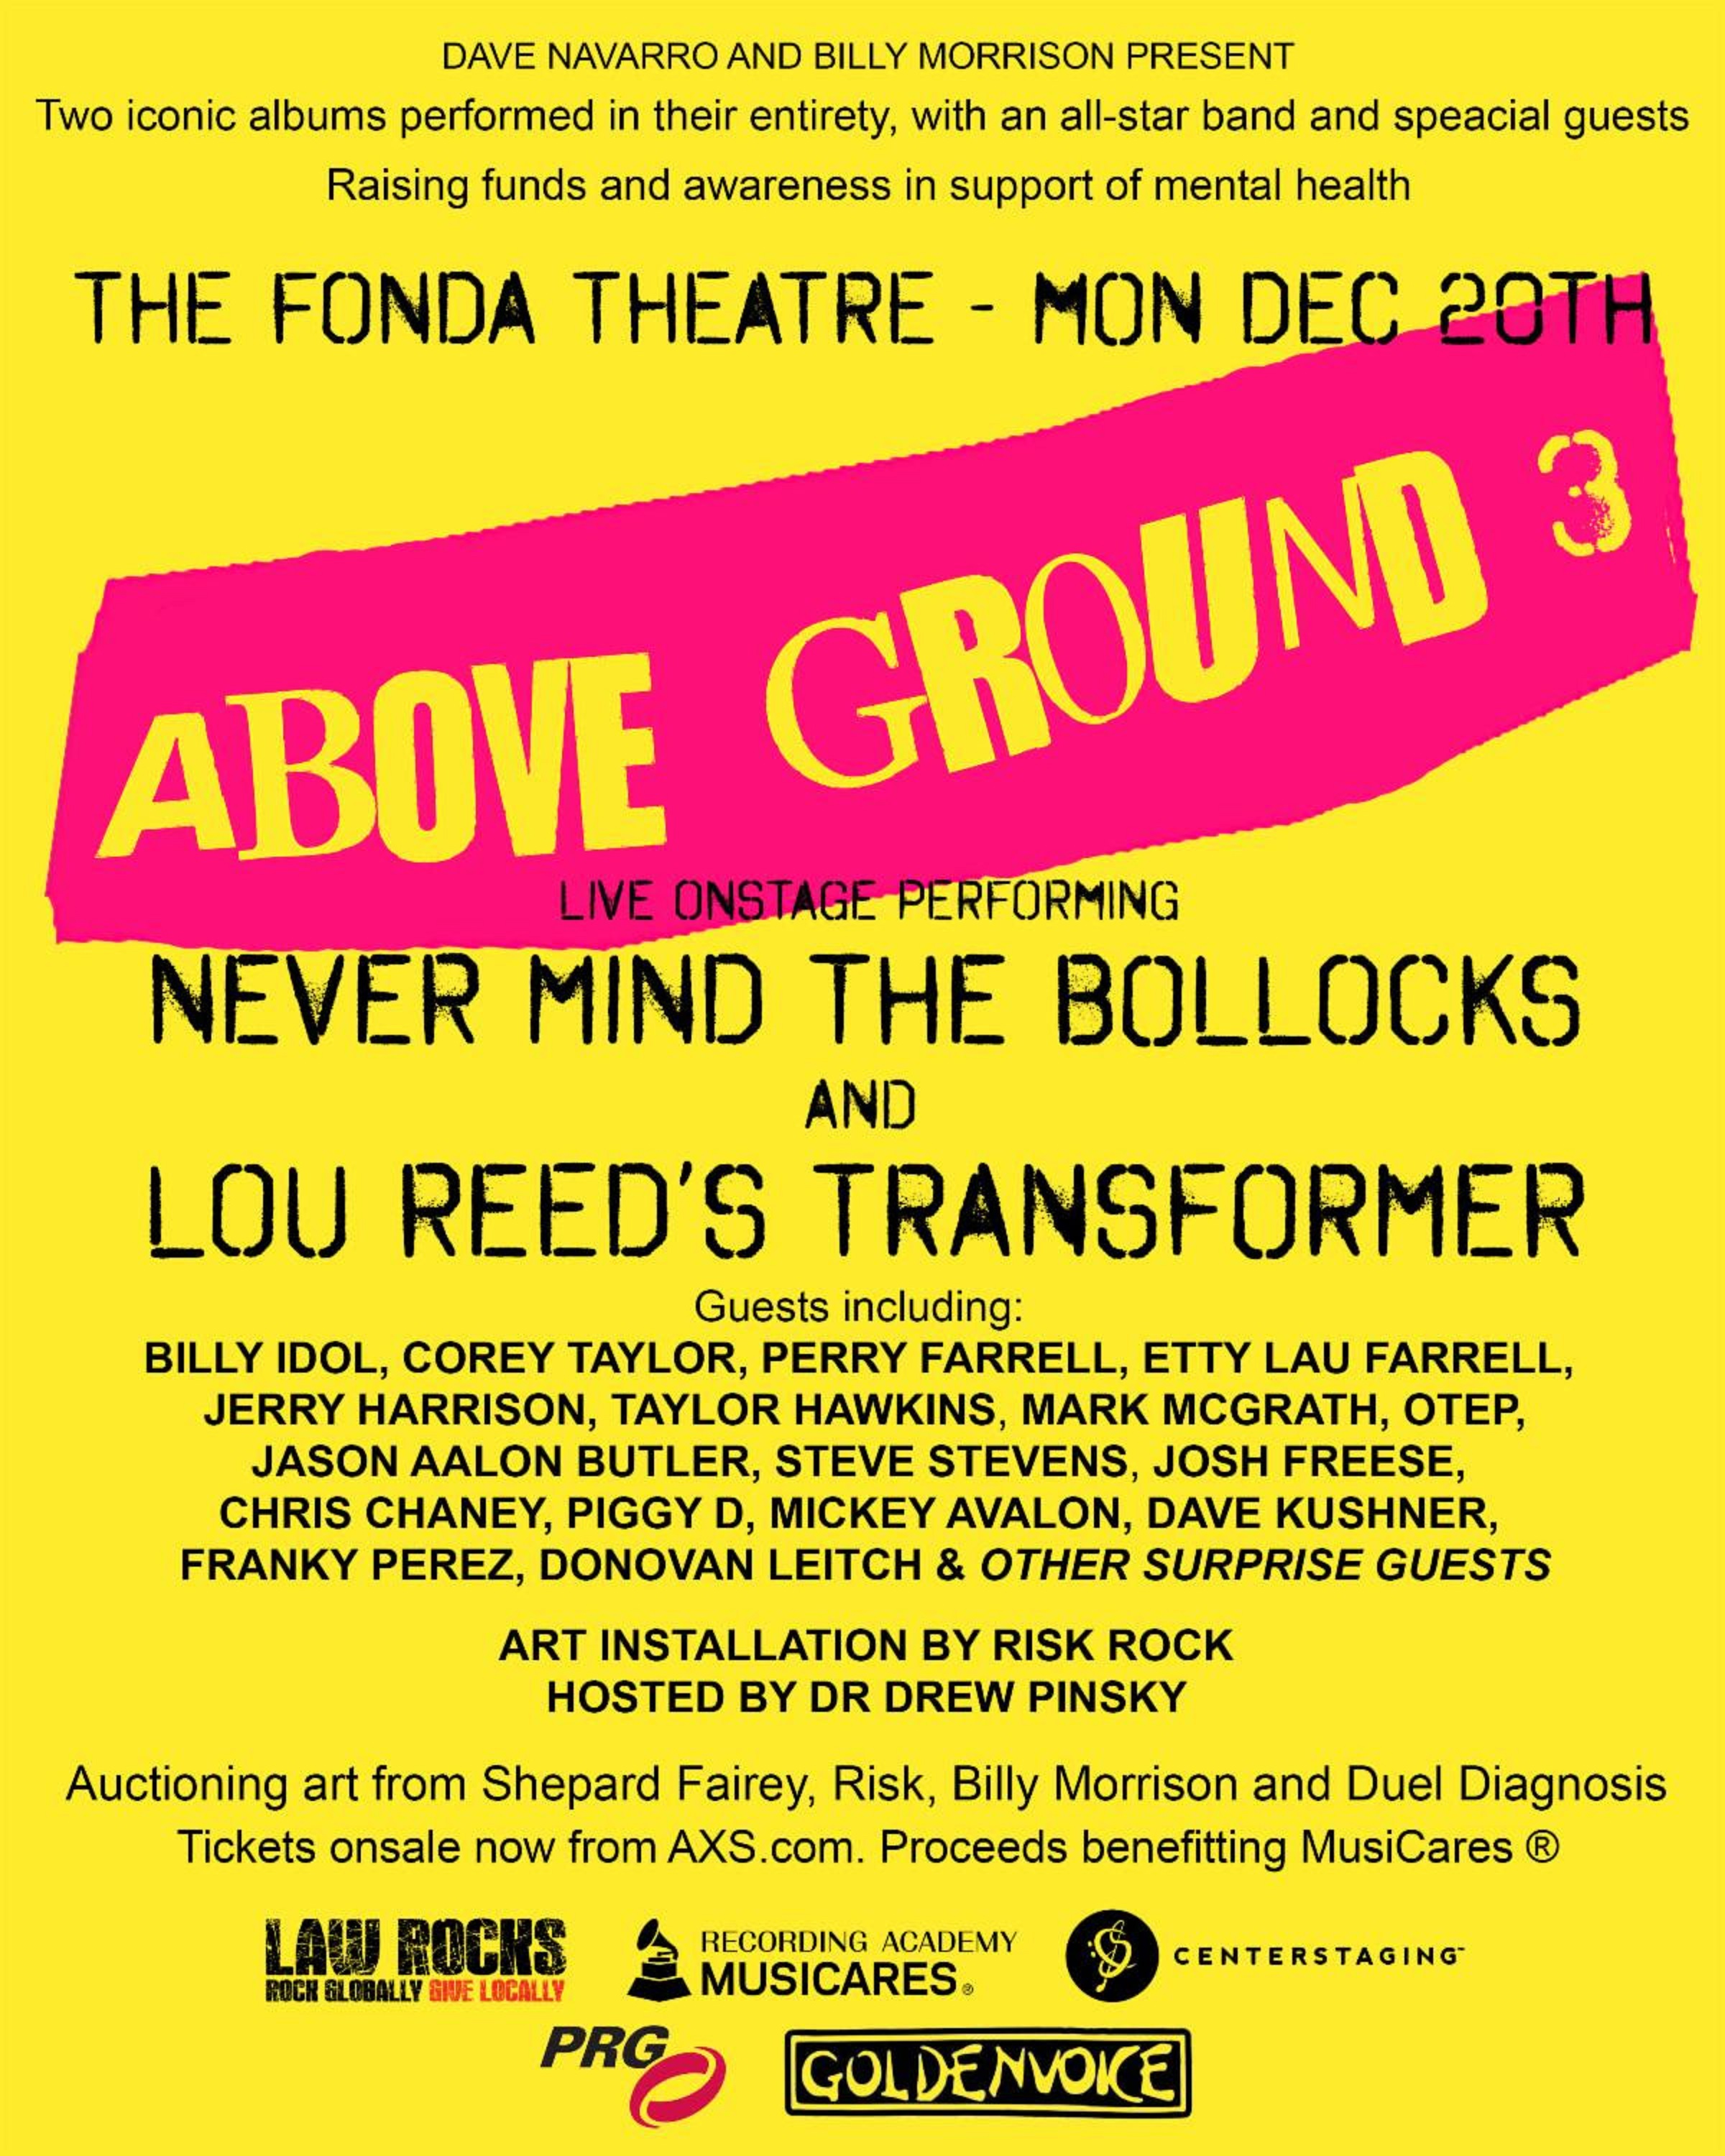 Additional Guests Announced For Dave Navarro & Billy Morrison's "ABOVE GROUND 3" Concert Benefitting Musicares® in LA on 12/20